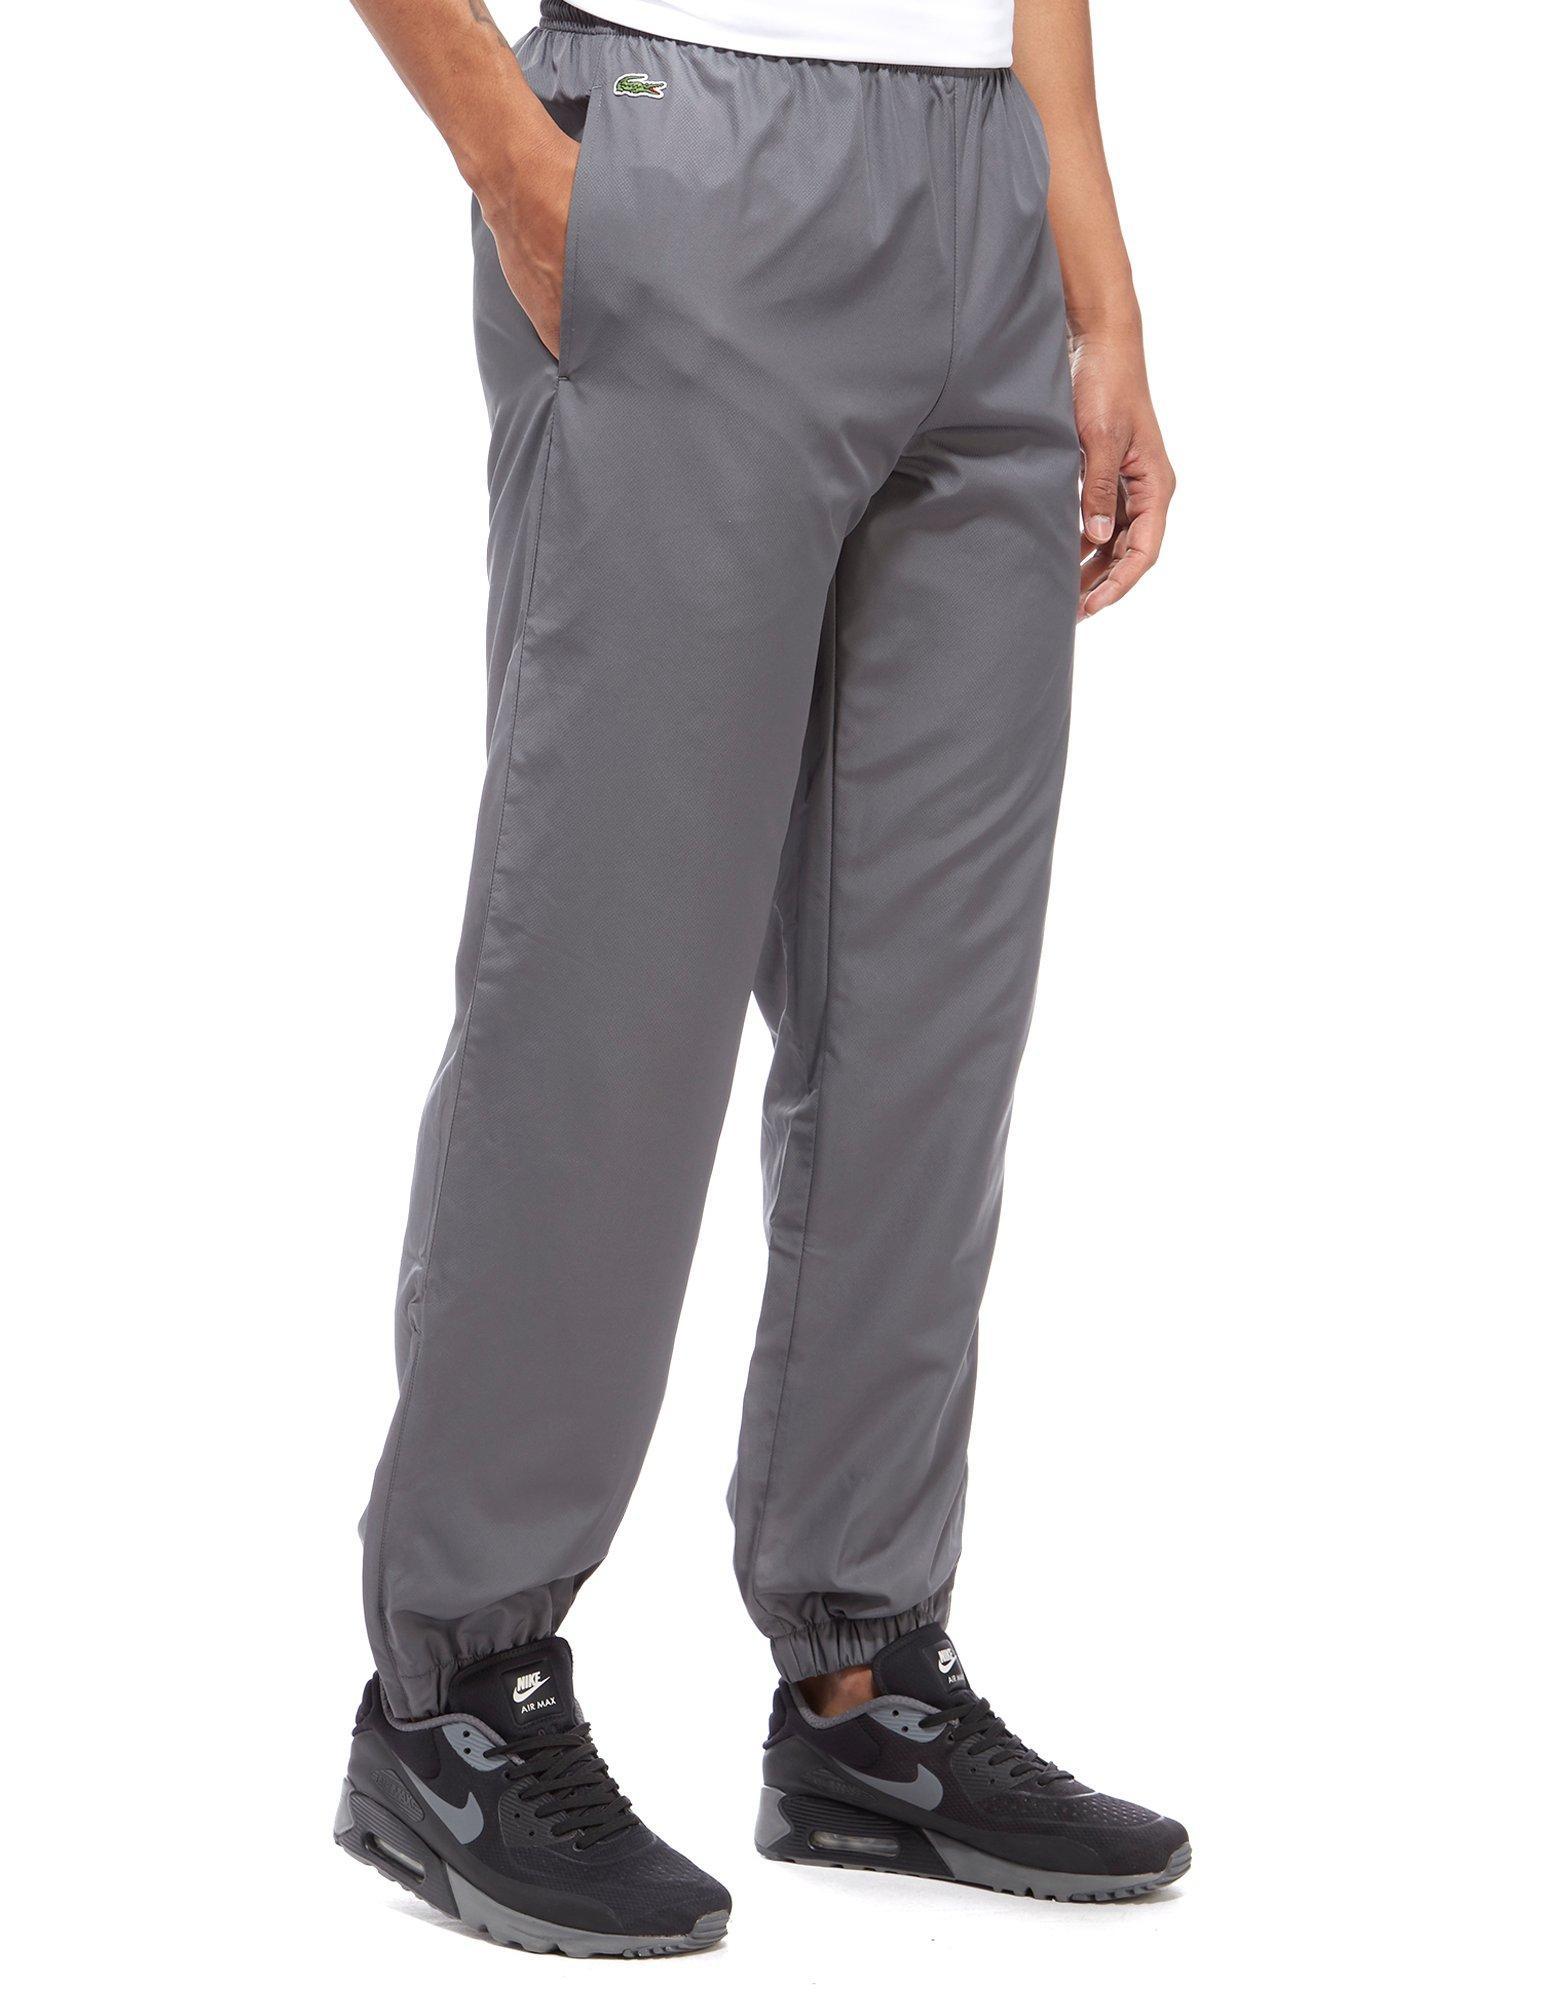 Lacoste Synthetic Guppy Track Pants in Charcoal (Grey) for Men - Lyst